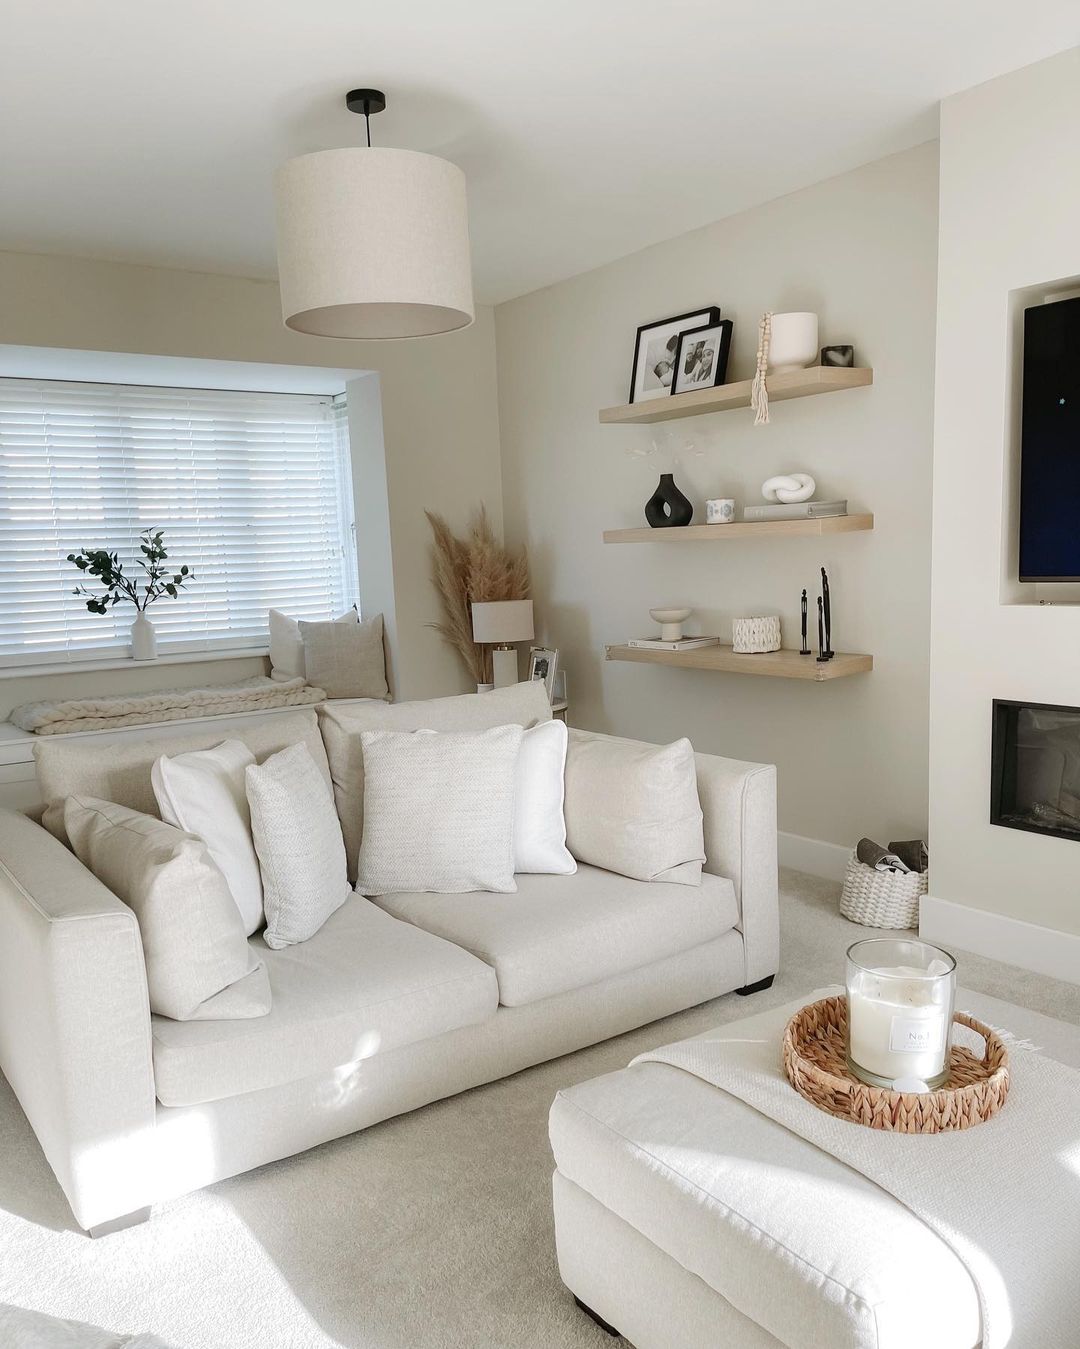 Top 10 Tips for Creating a Minimalist Living Room